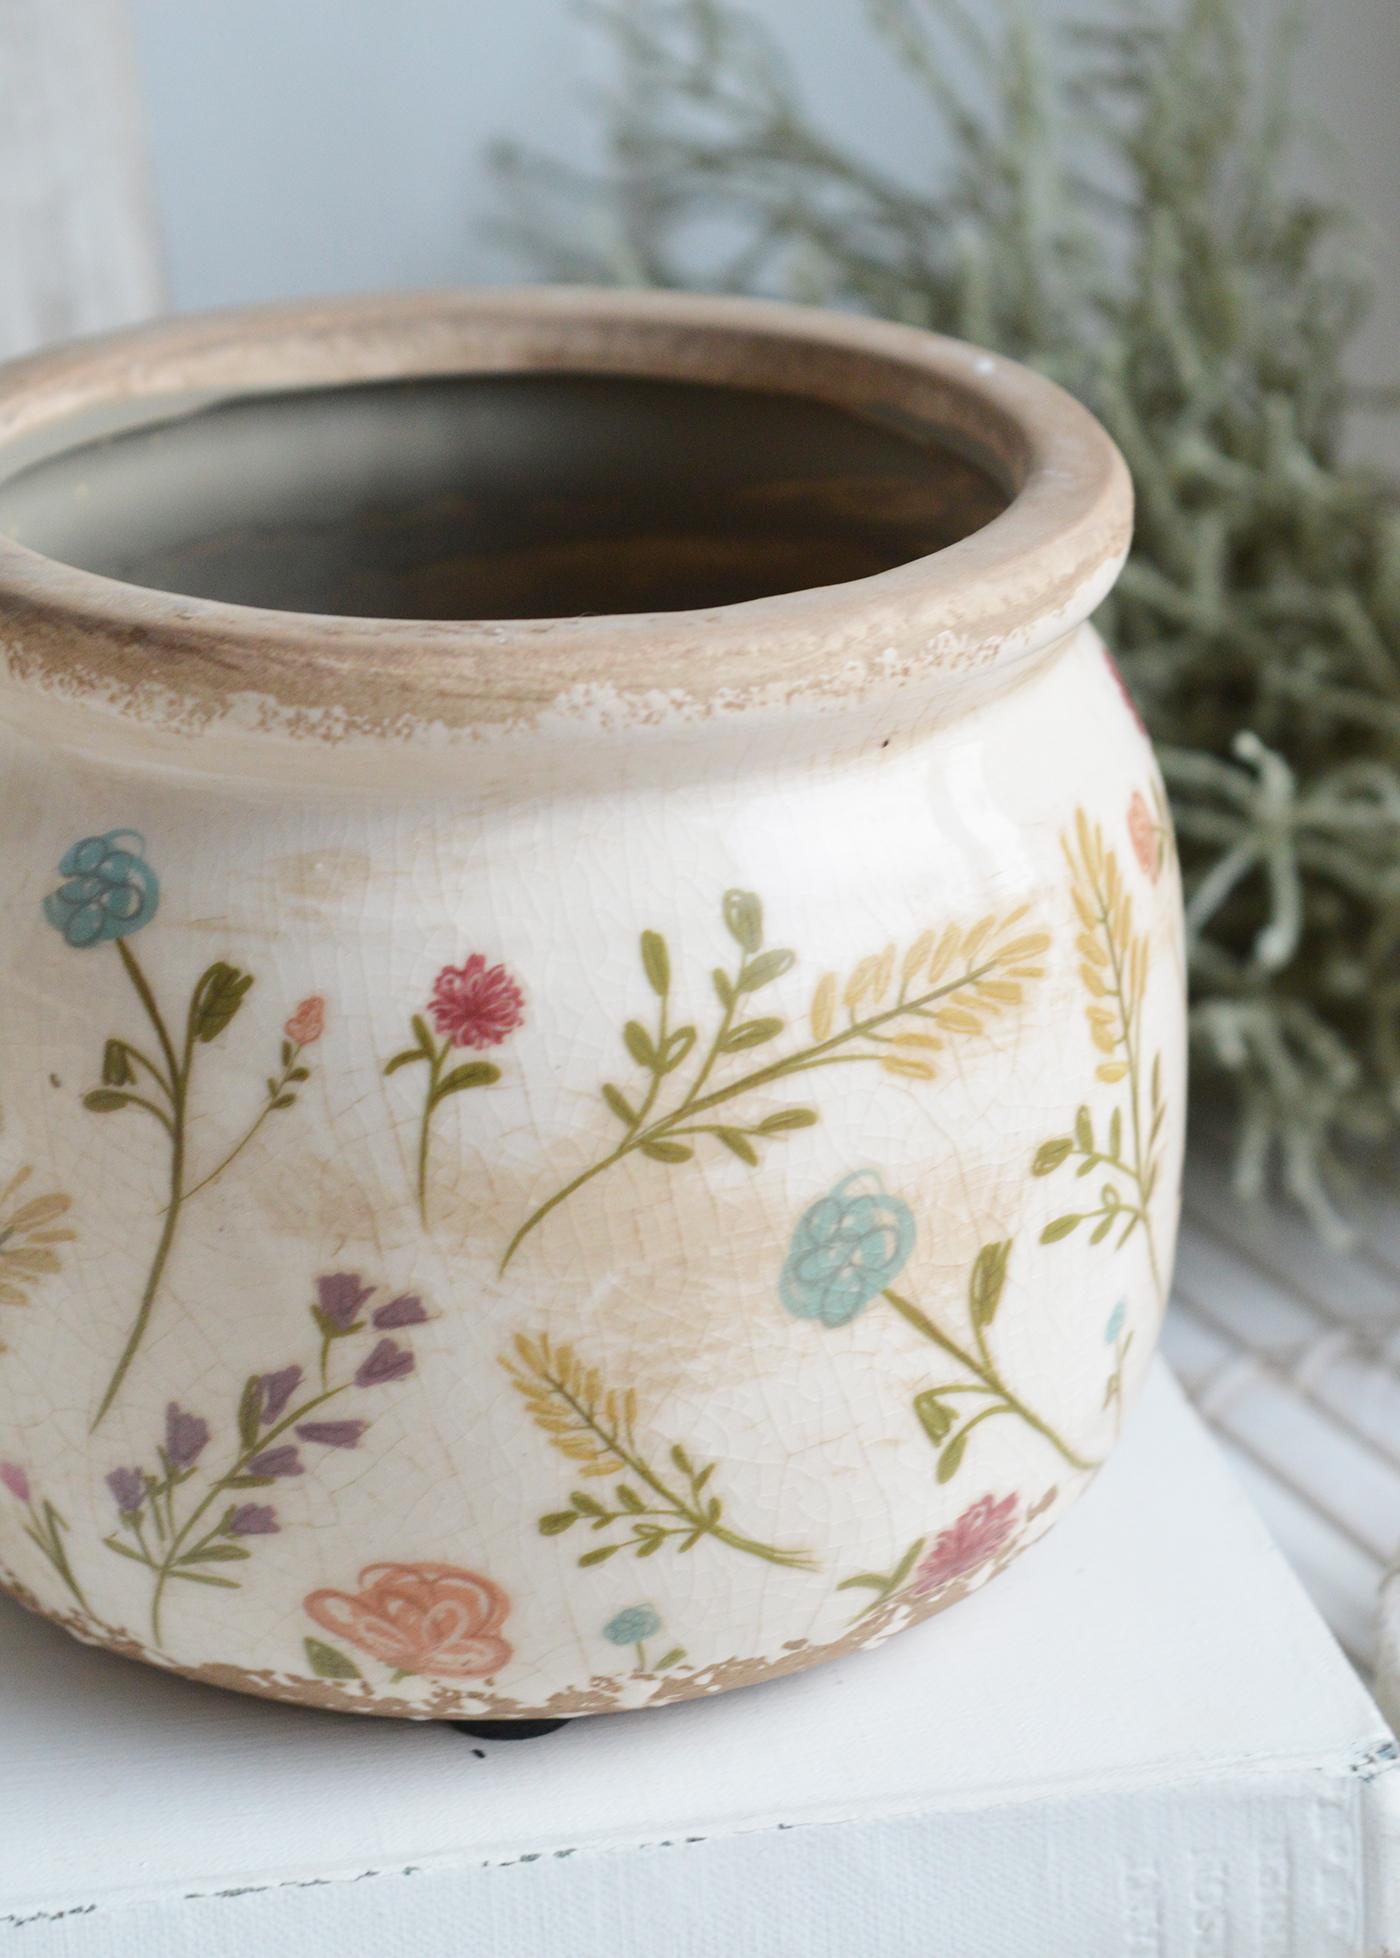 Marston Aged Vintage Style Ceramics - New England, coastal, modern farmhouse and country homes interiors and furniture